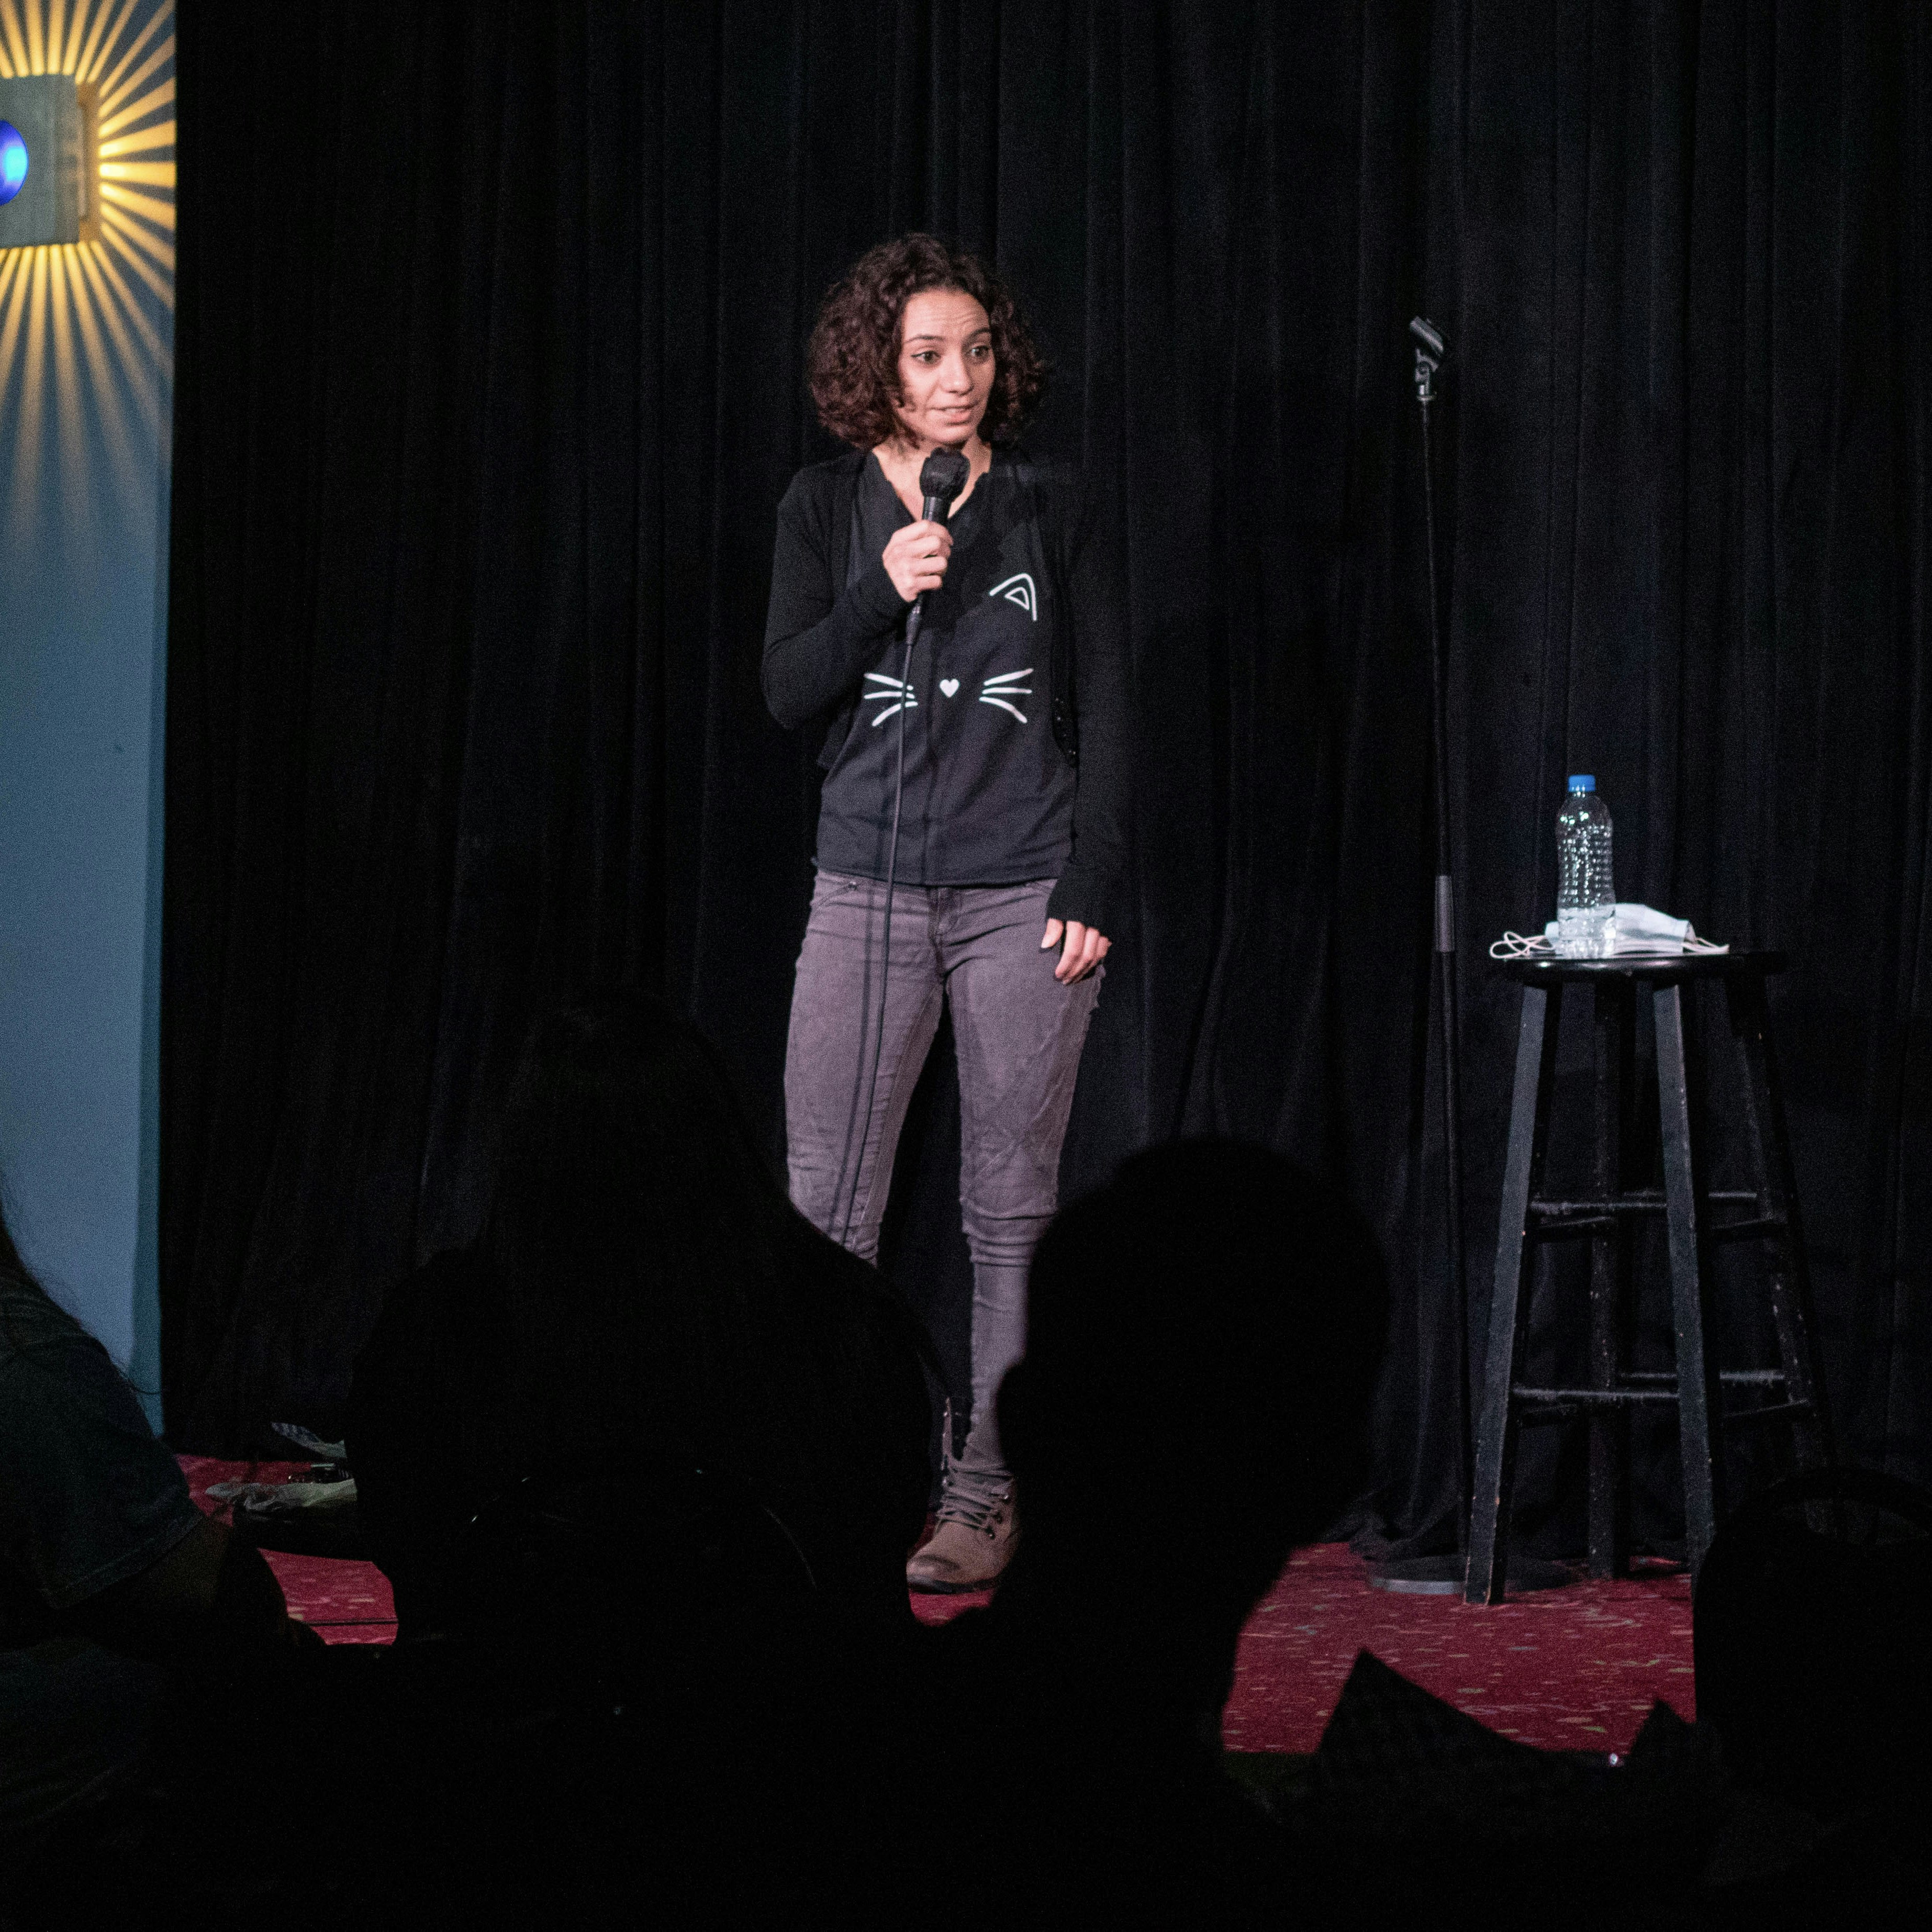 Liz Miele's New Hour Show at The Bill Murray - Angel Comedy